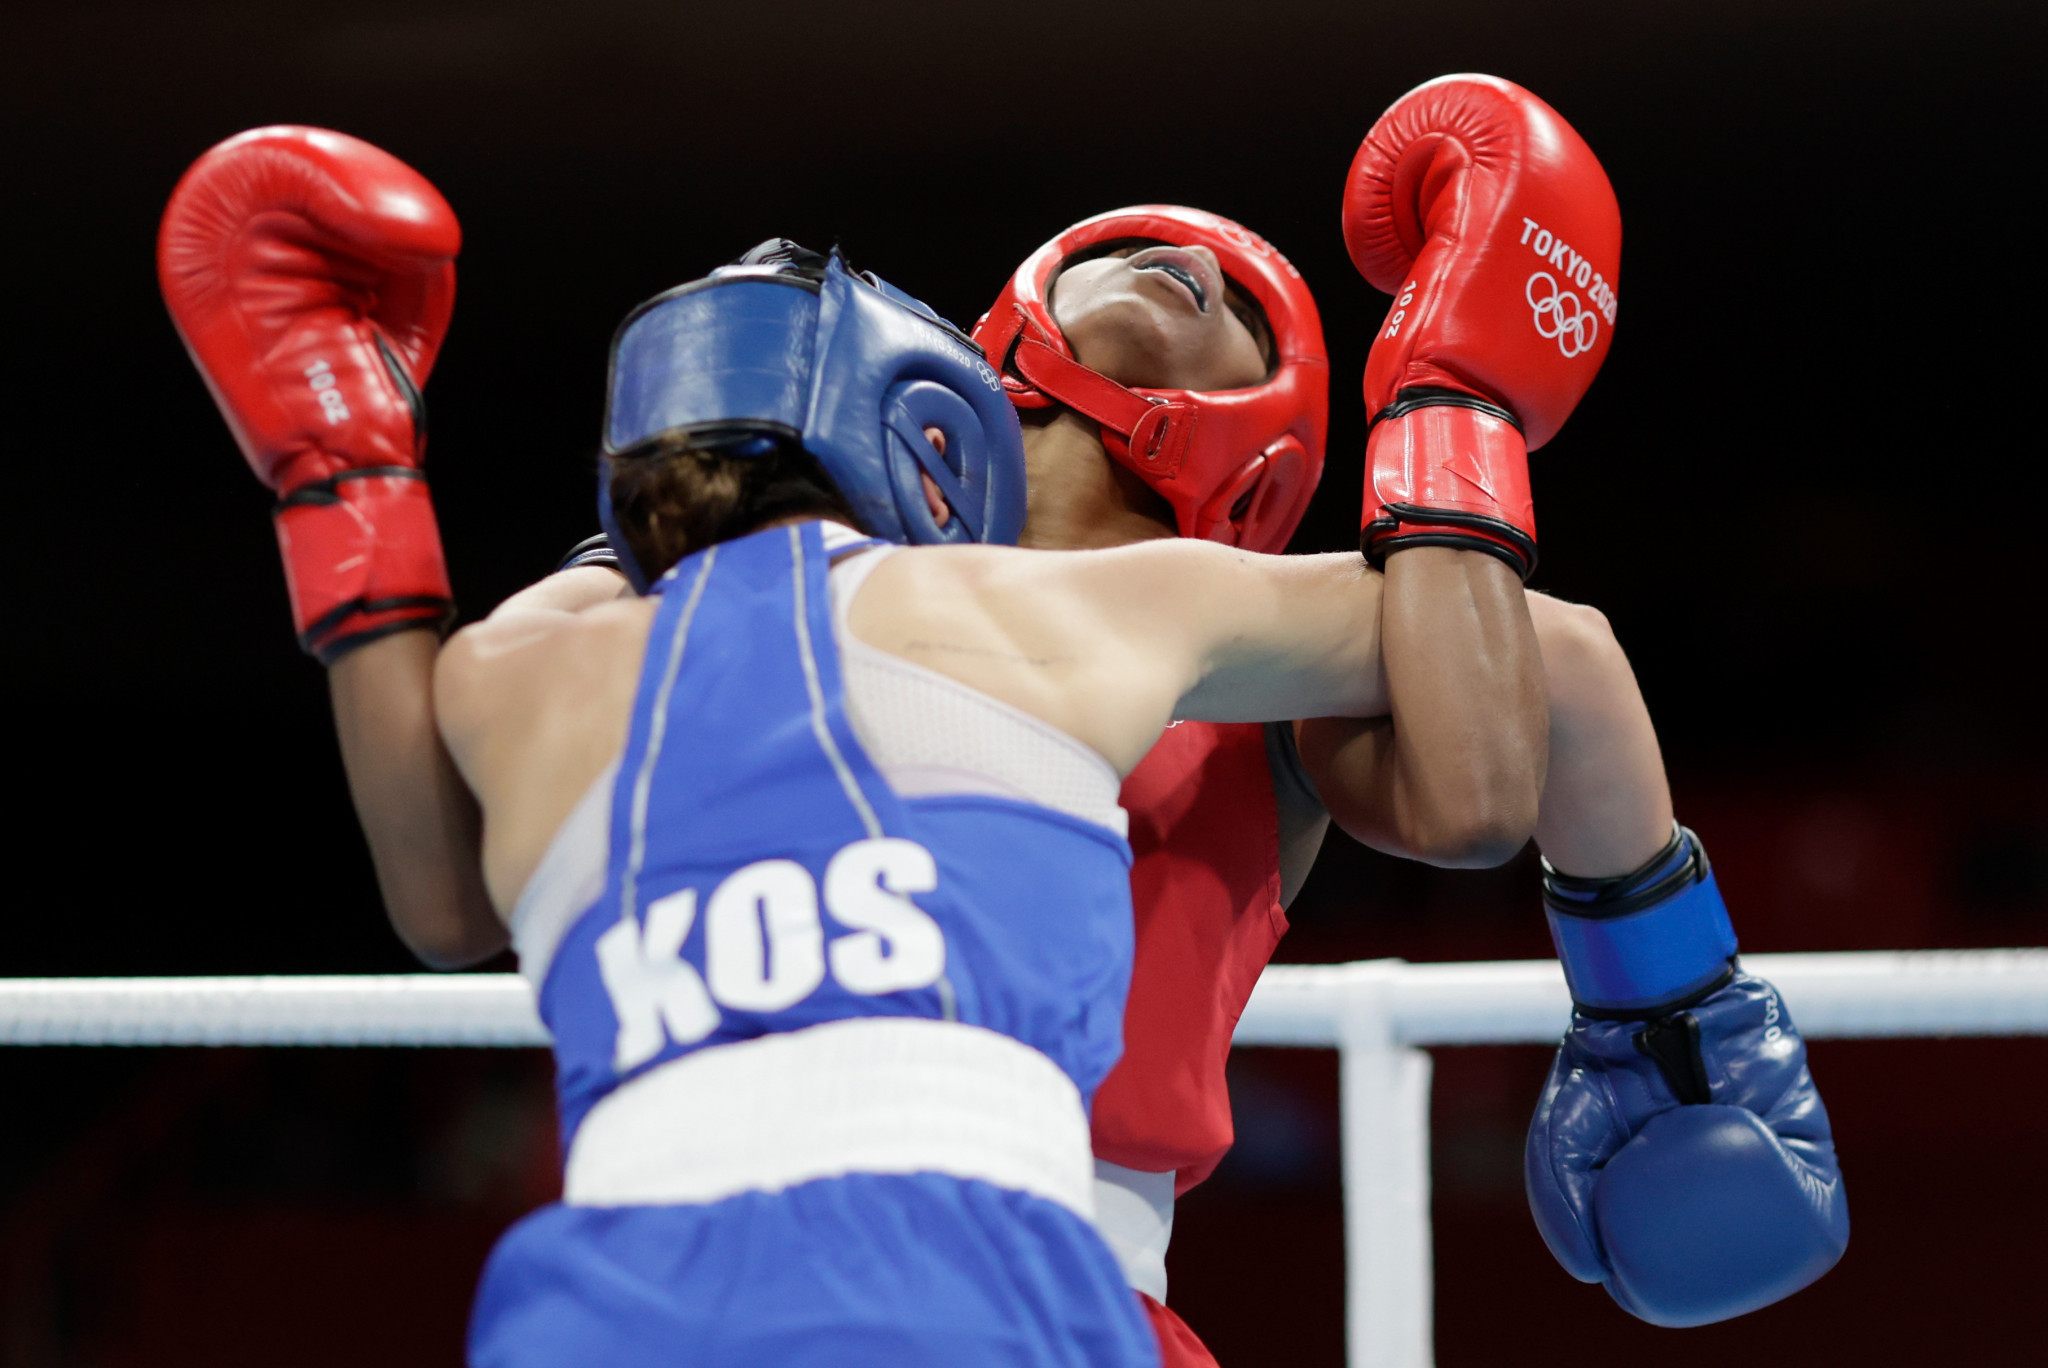 Kosovo refuse to compete at IBA Women's Boxing World Championships over "discriminatory" conditions